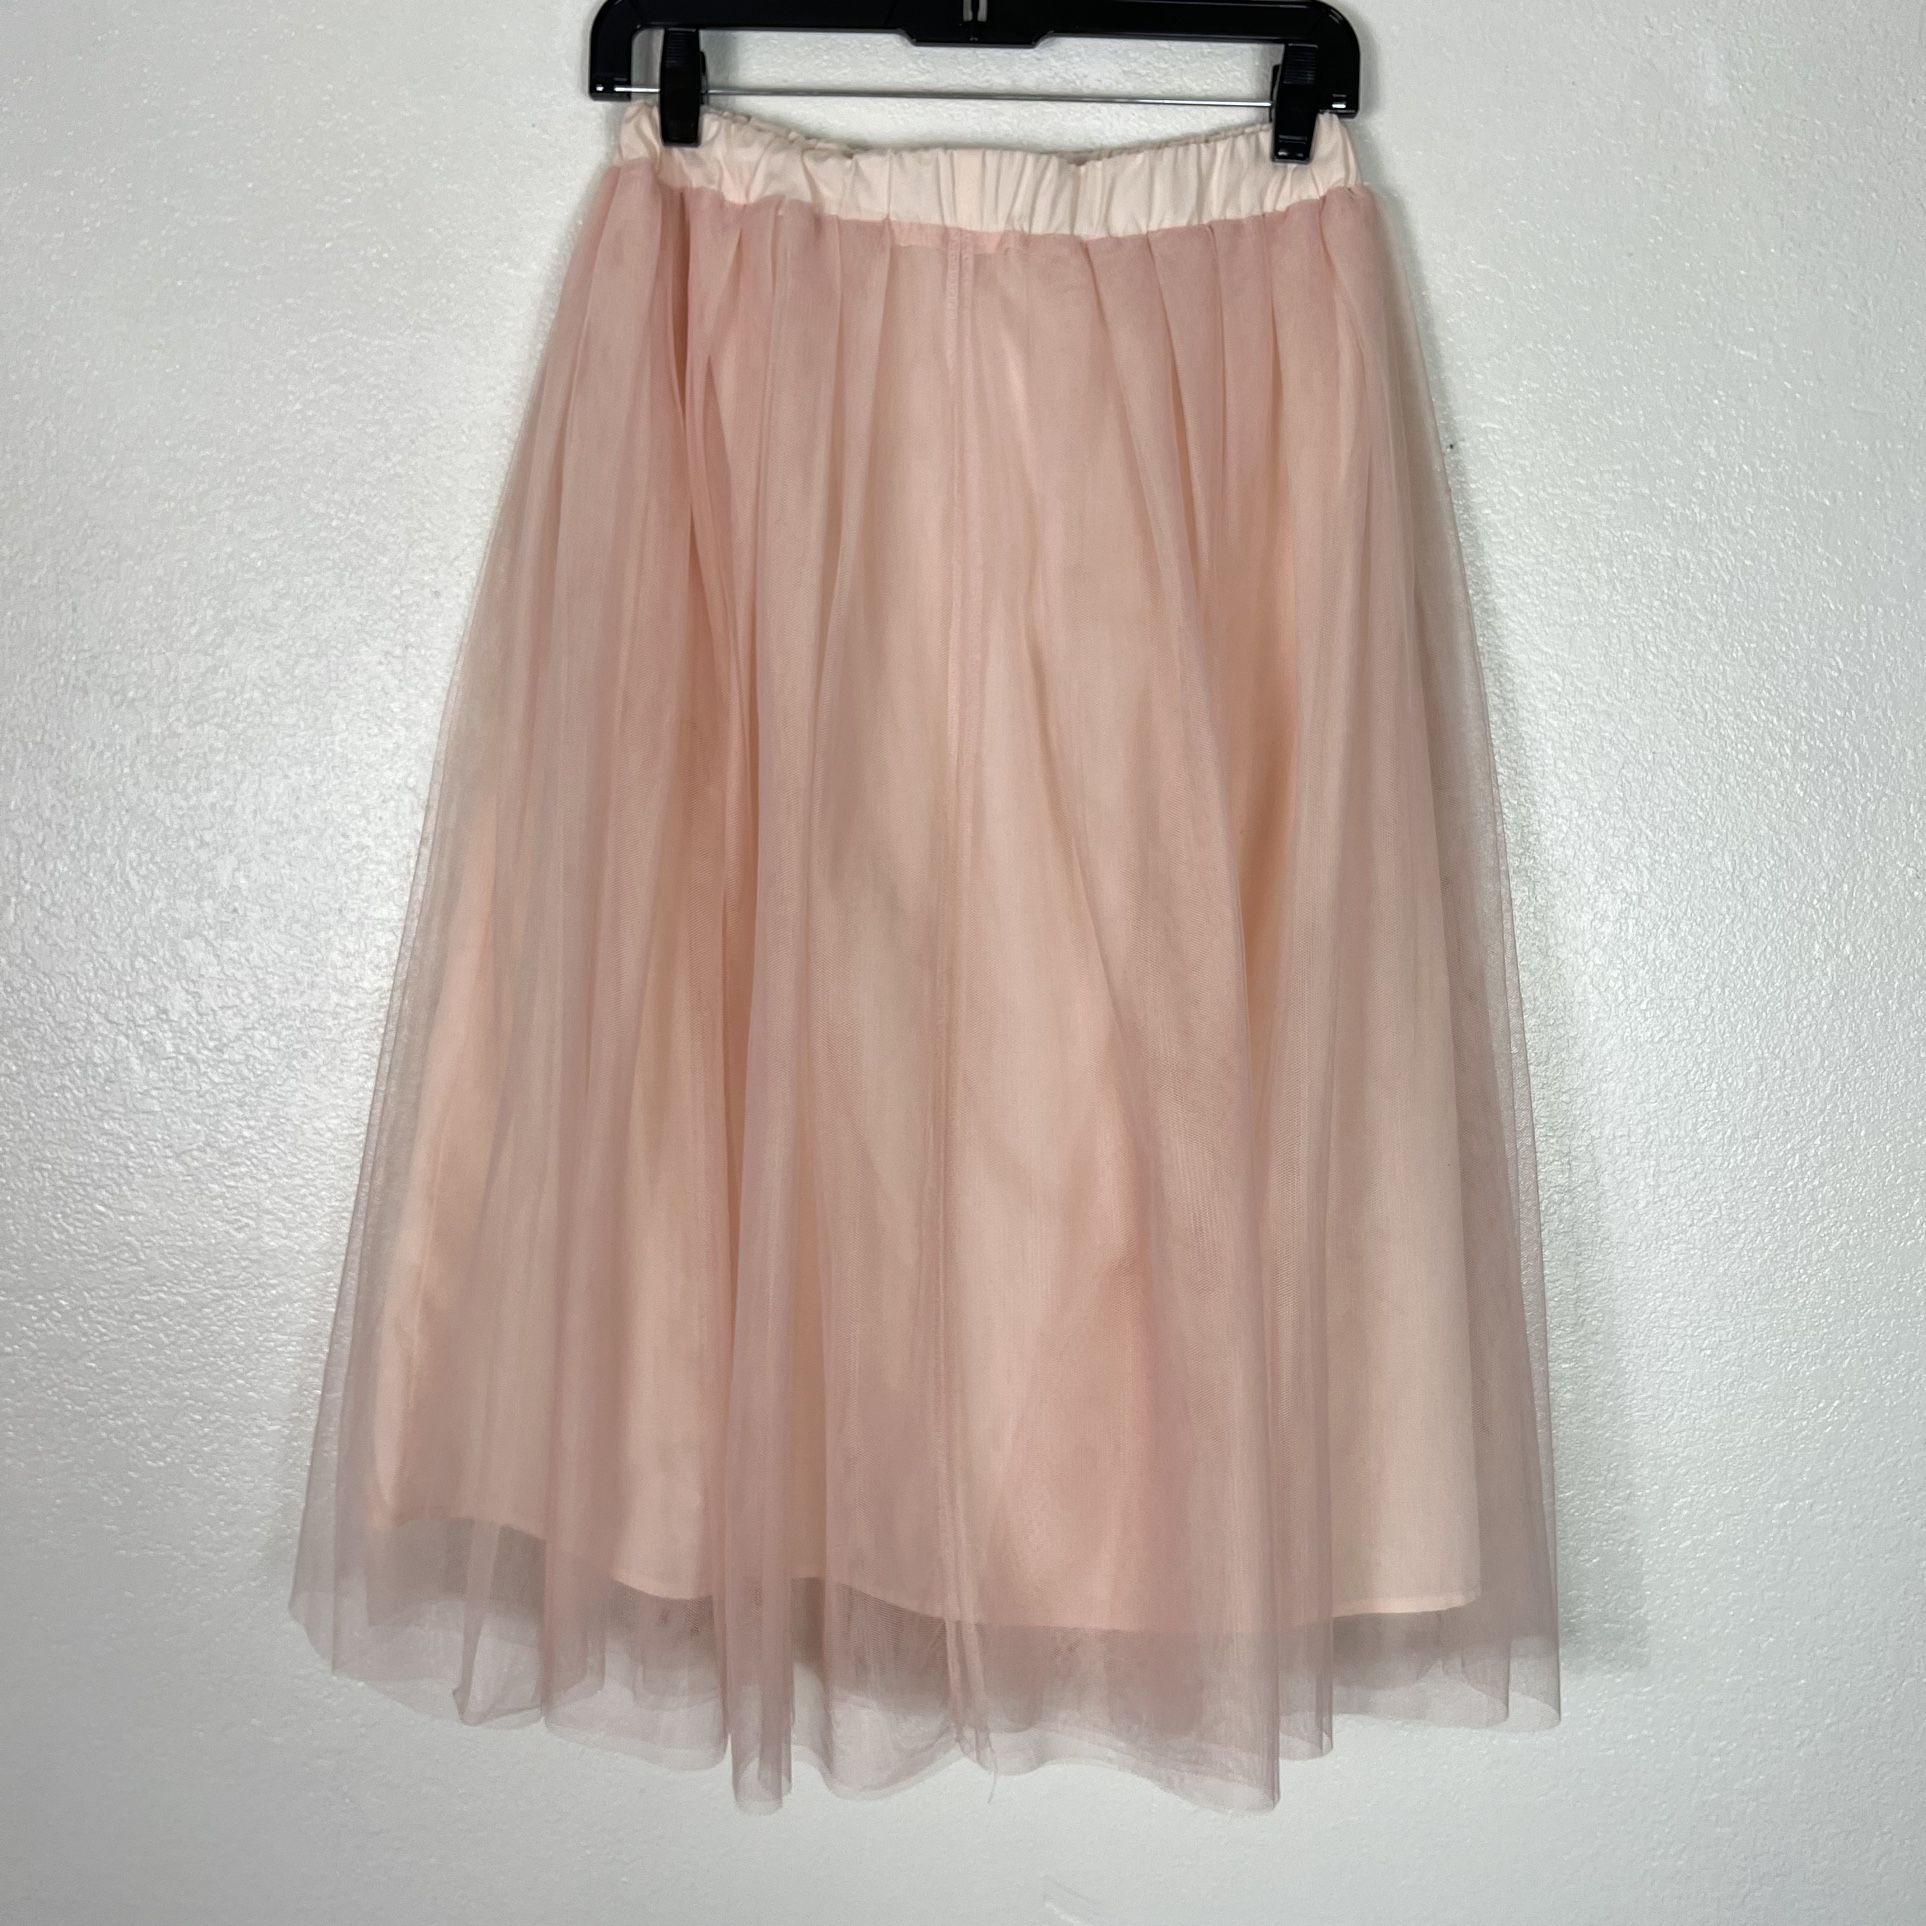 Persun Pink tulle midi skirt size small 